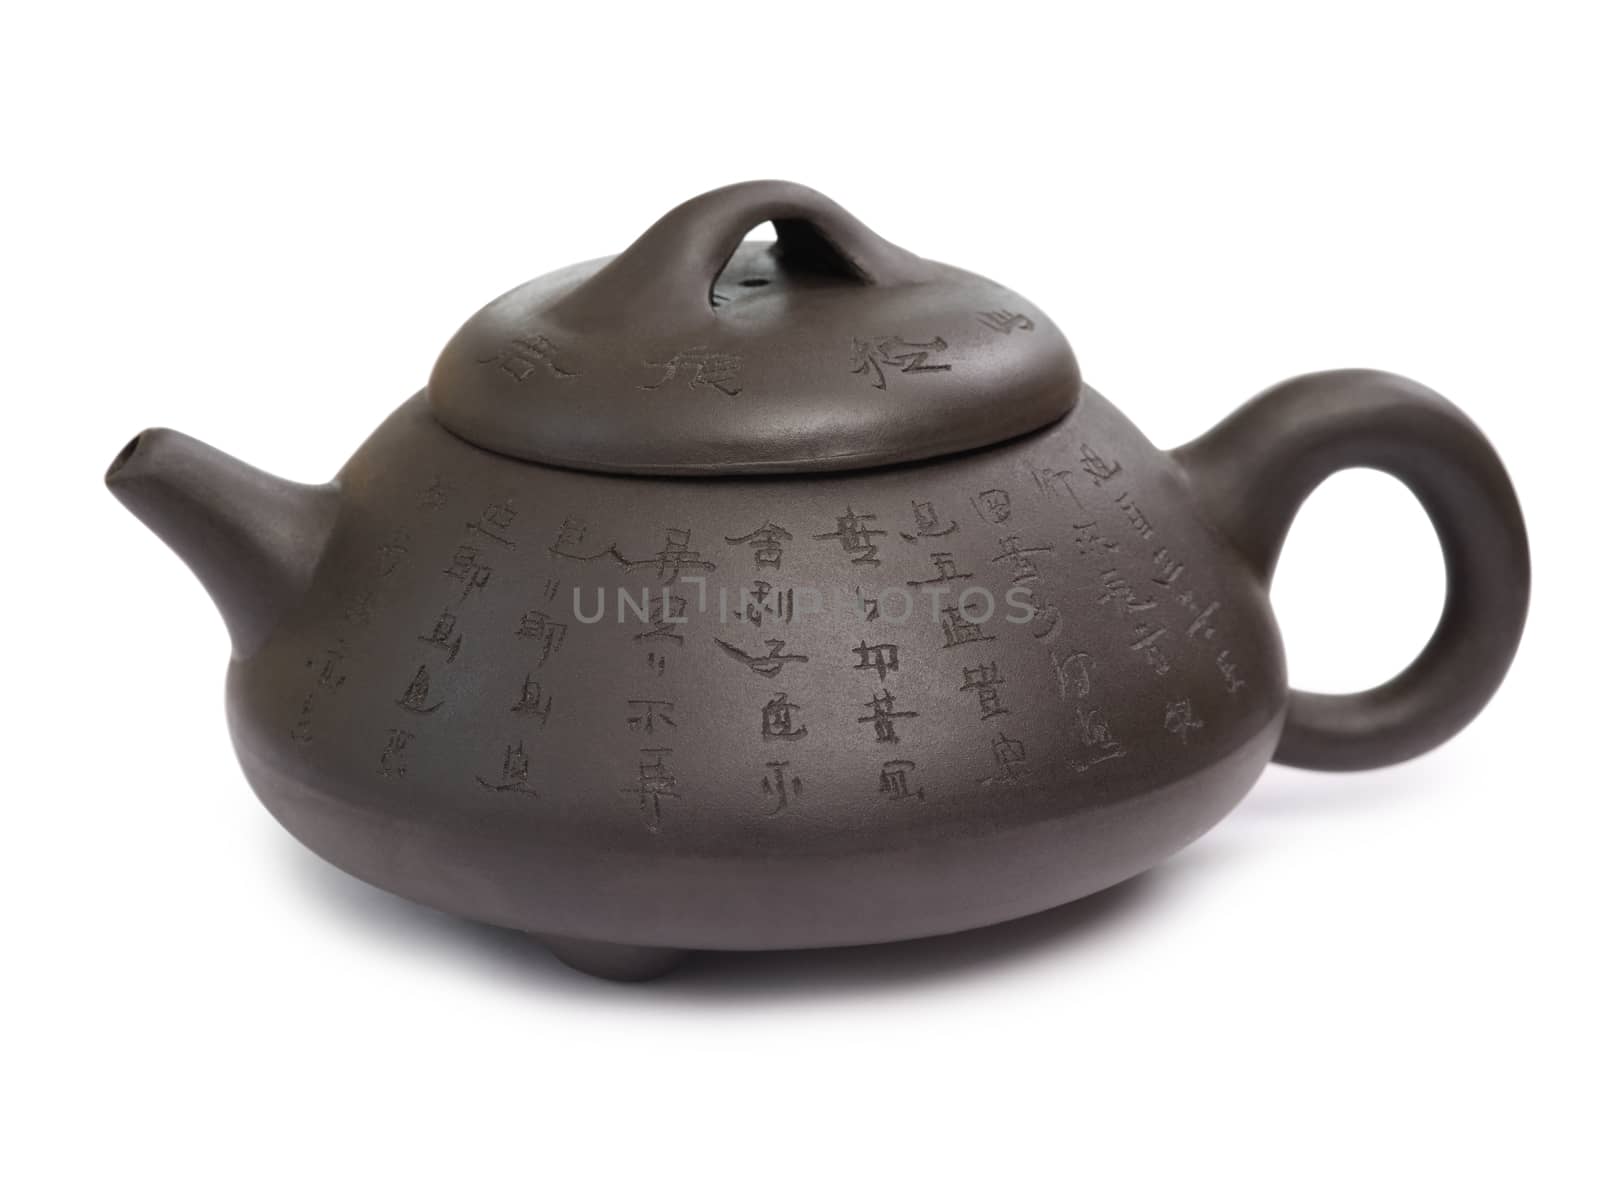 Chinese teapot by sumners